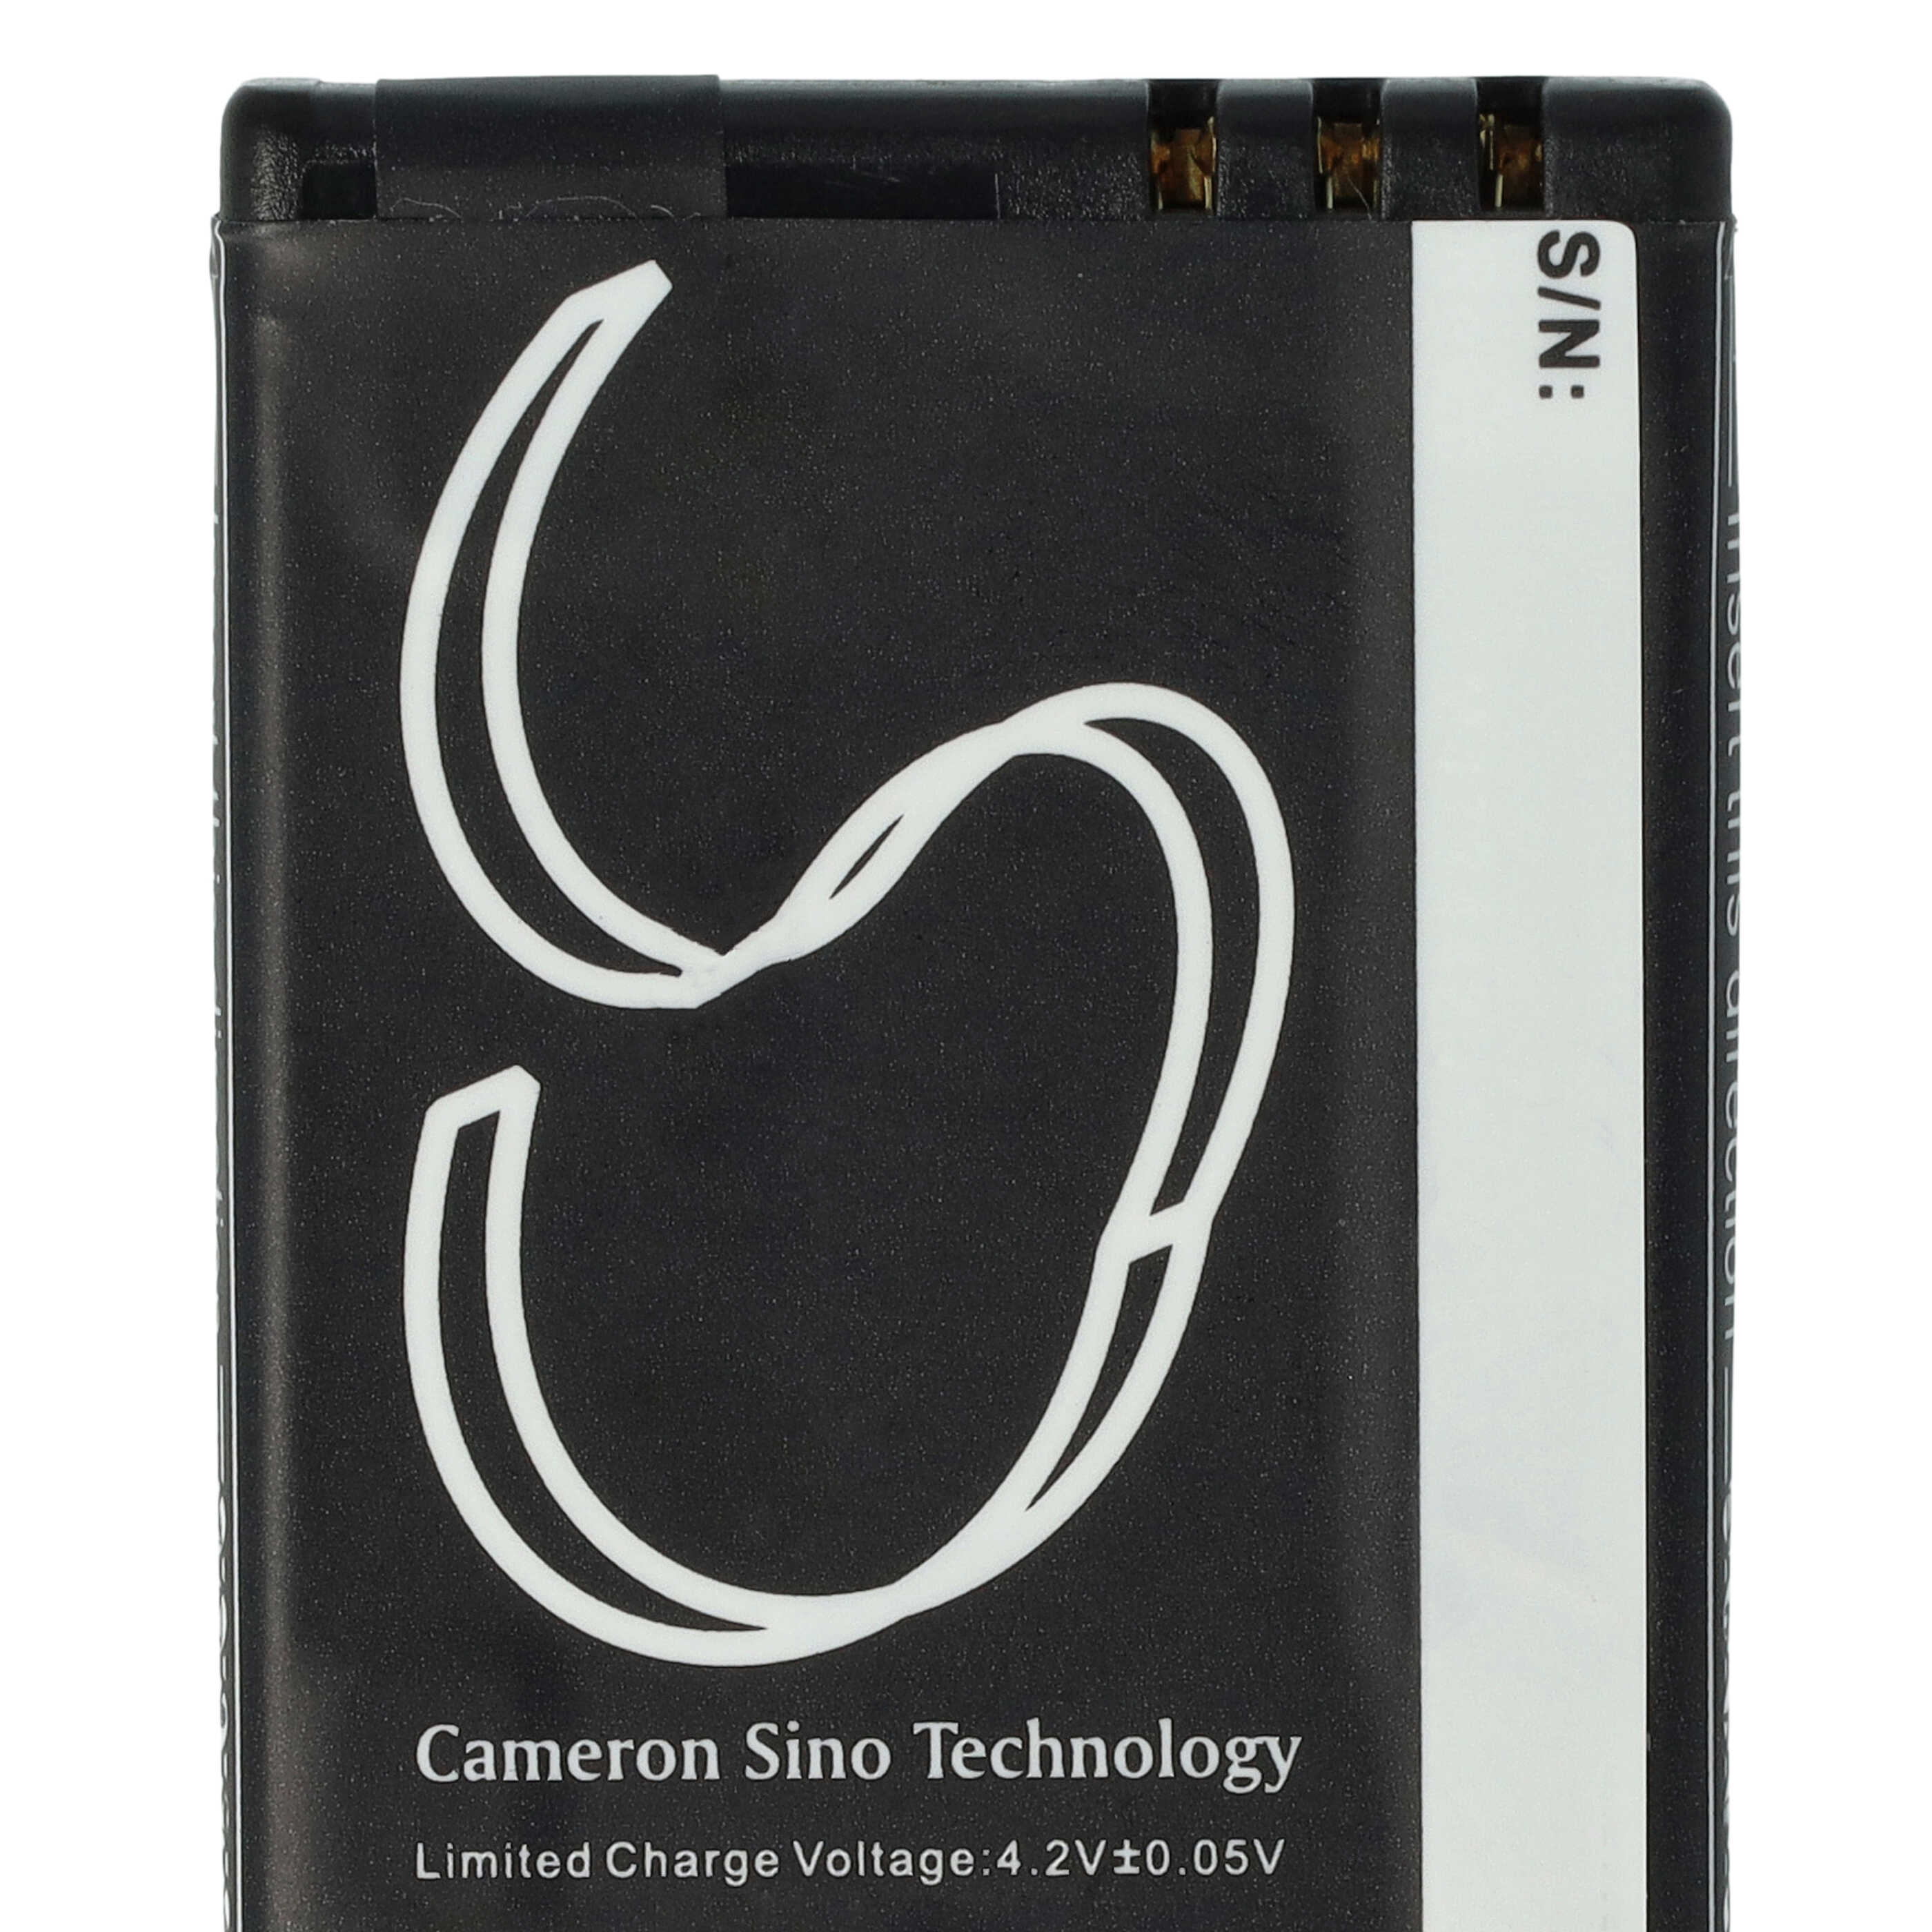 Mobile Phone Battery Replacement for Elson BTY26176MOBISTEL/STD, BTY26176 - 800mAh 3.7V Li-Ion